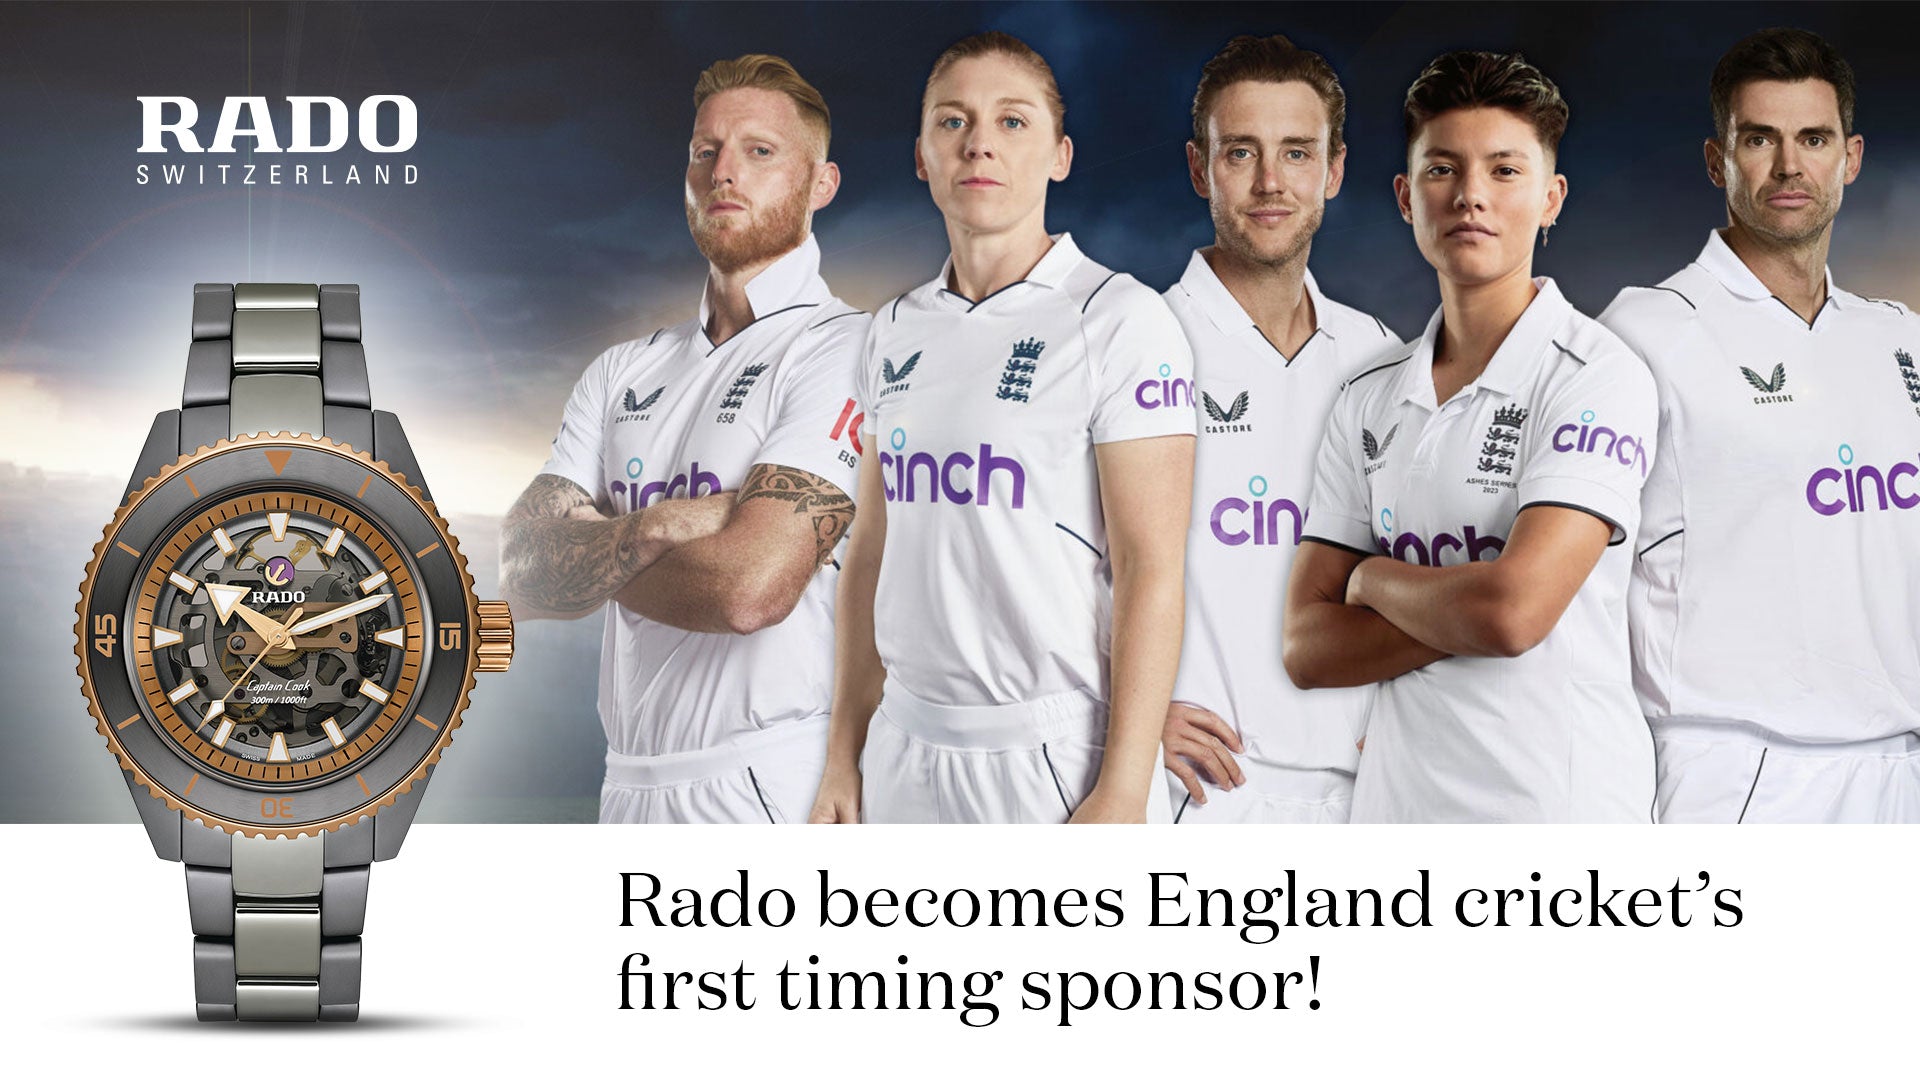 Attention Cricket Fans! Luxury Swiss Watch Brand Rado Becomes England Cricket’s First Timing Sponsor